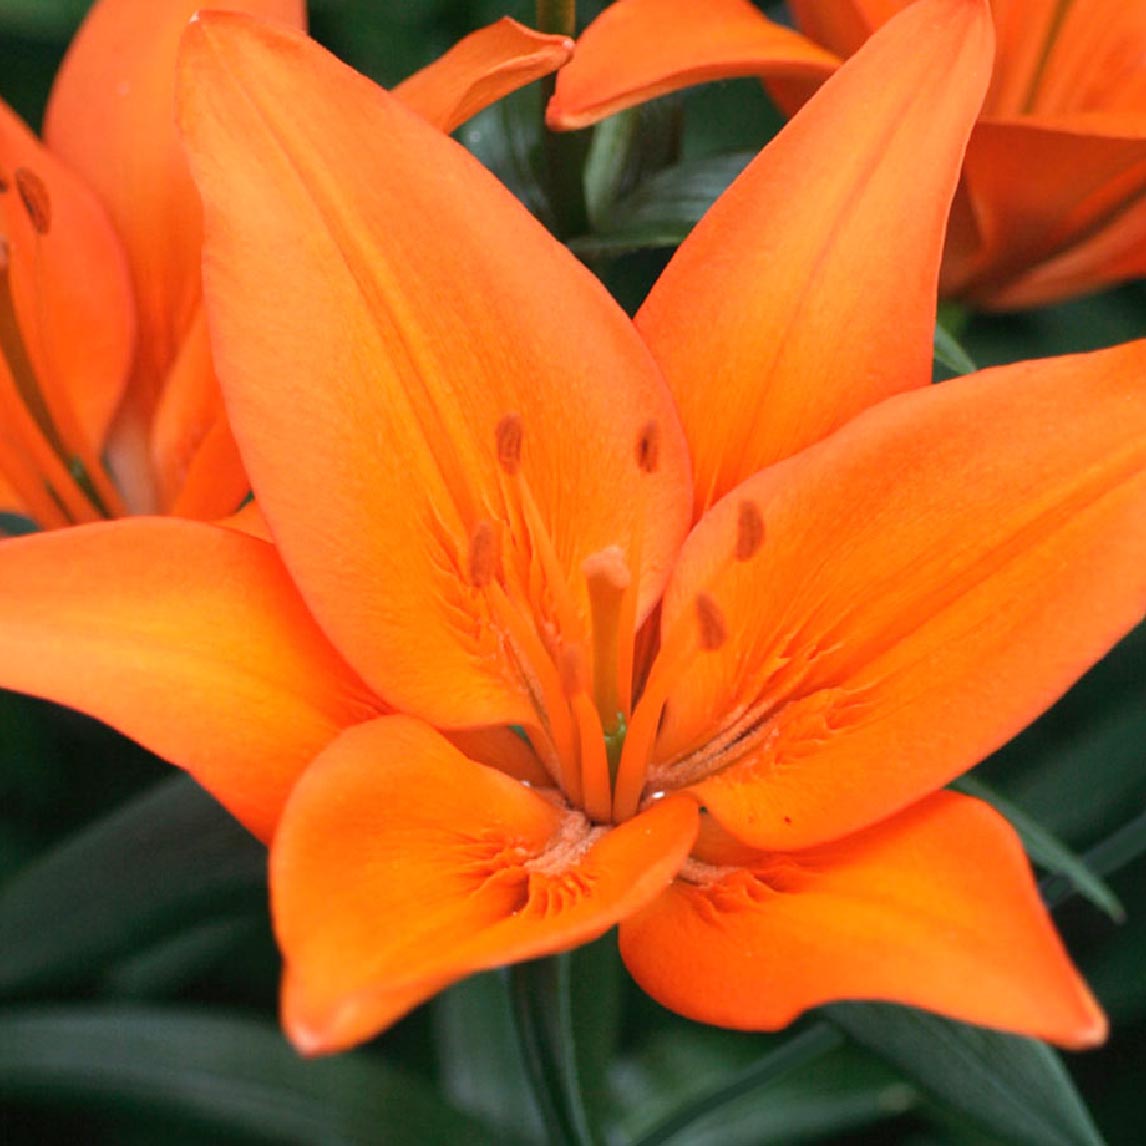 Lucky Dip Bulbs - Lilium Flowering Collection Only $25